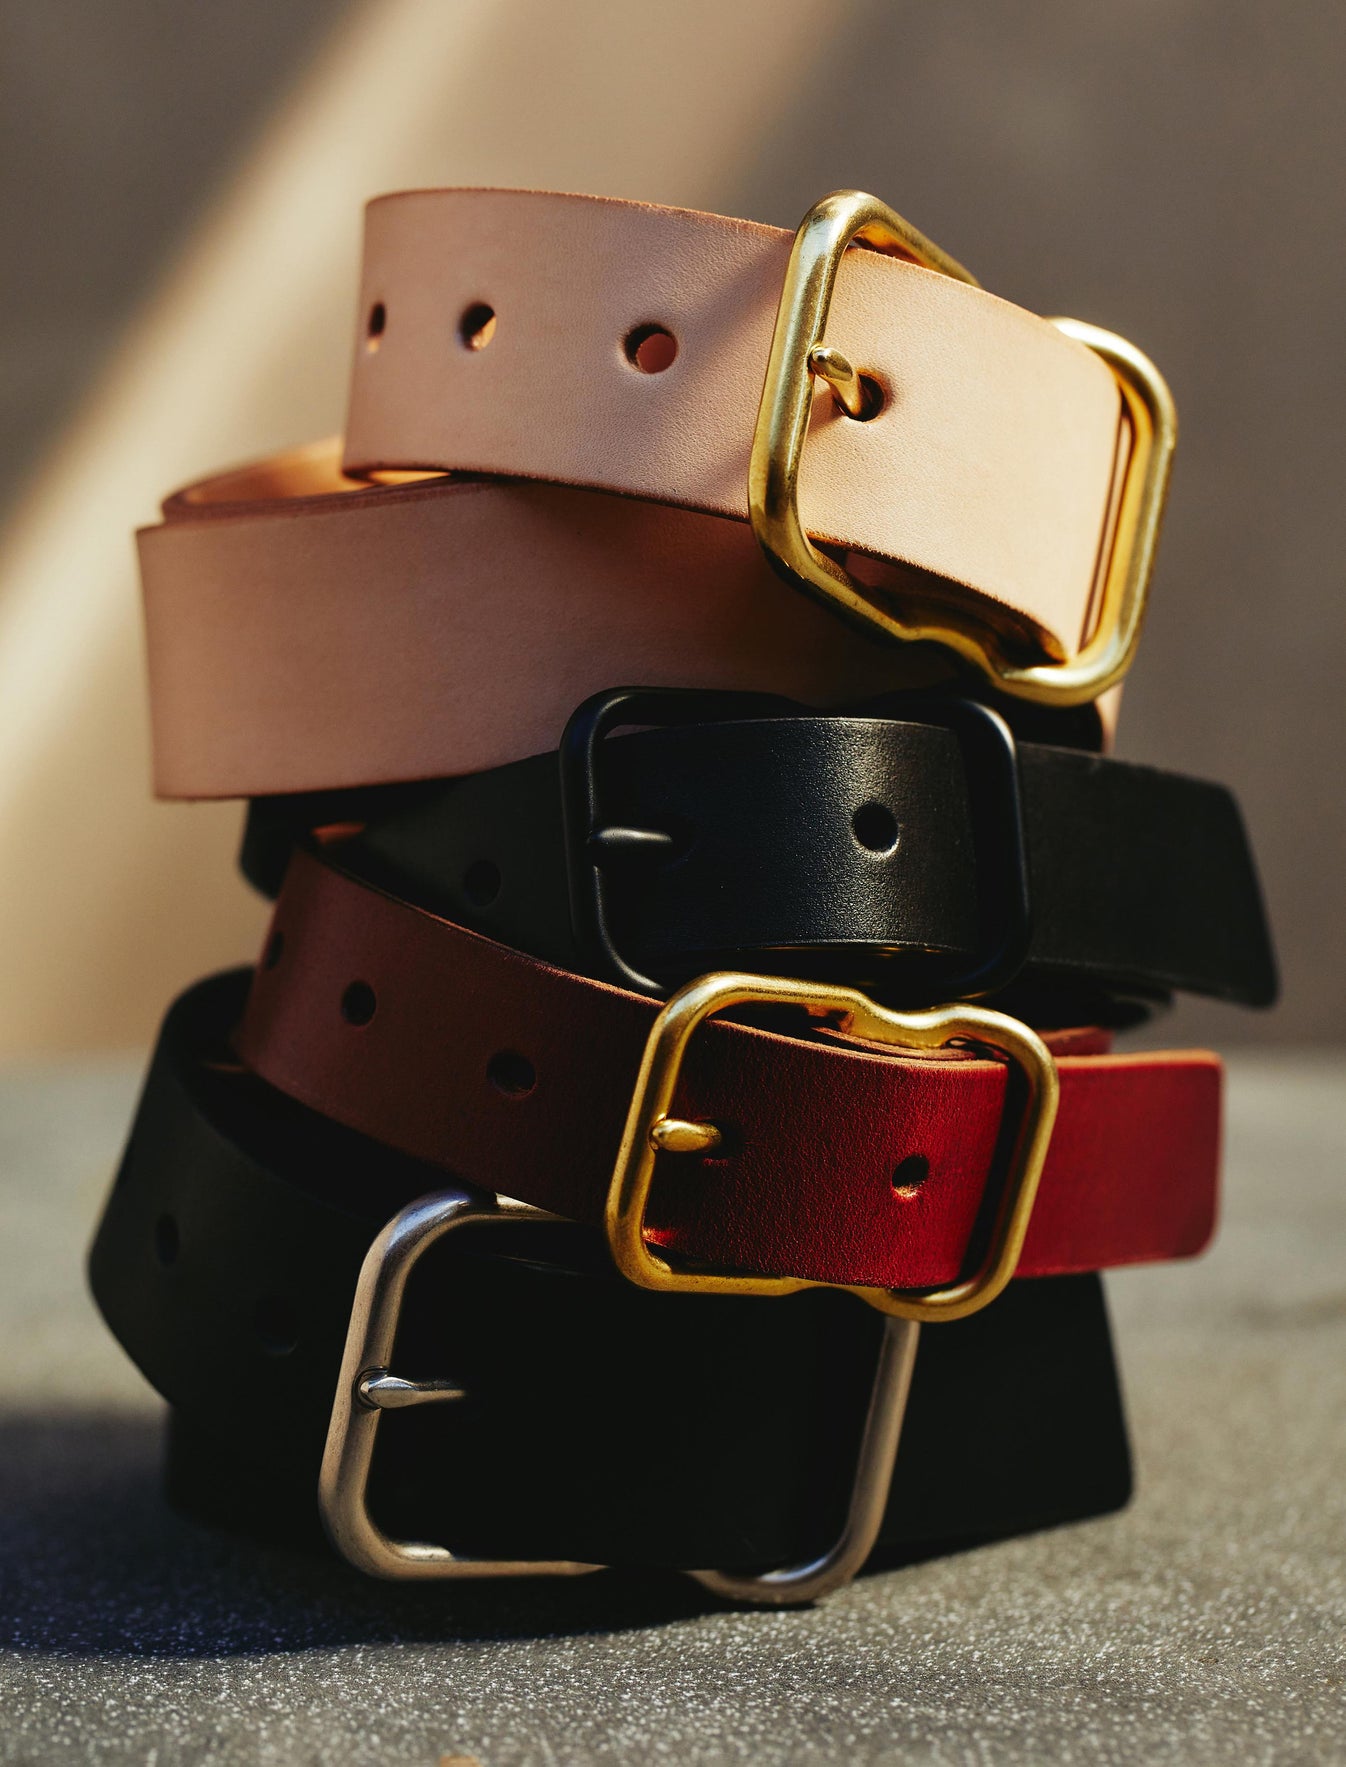 Leather Belt Strap Material, Leathers Strap Accessories